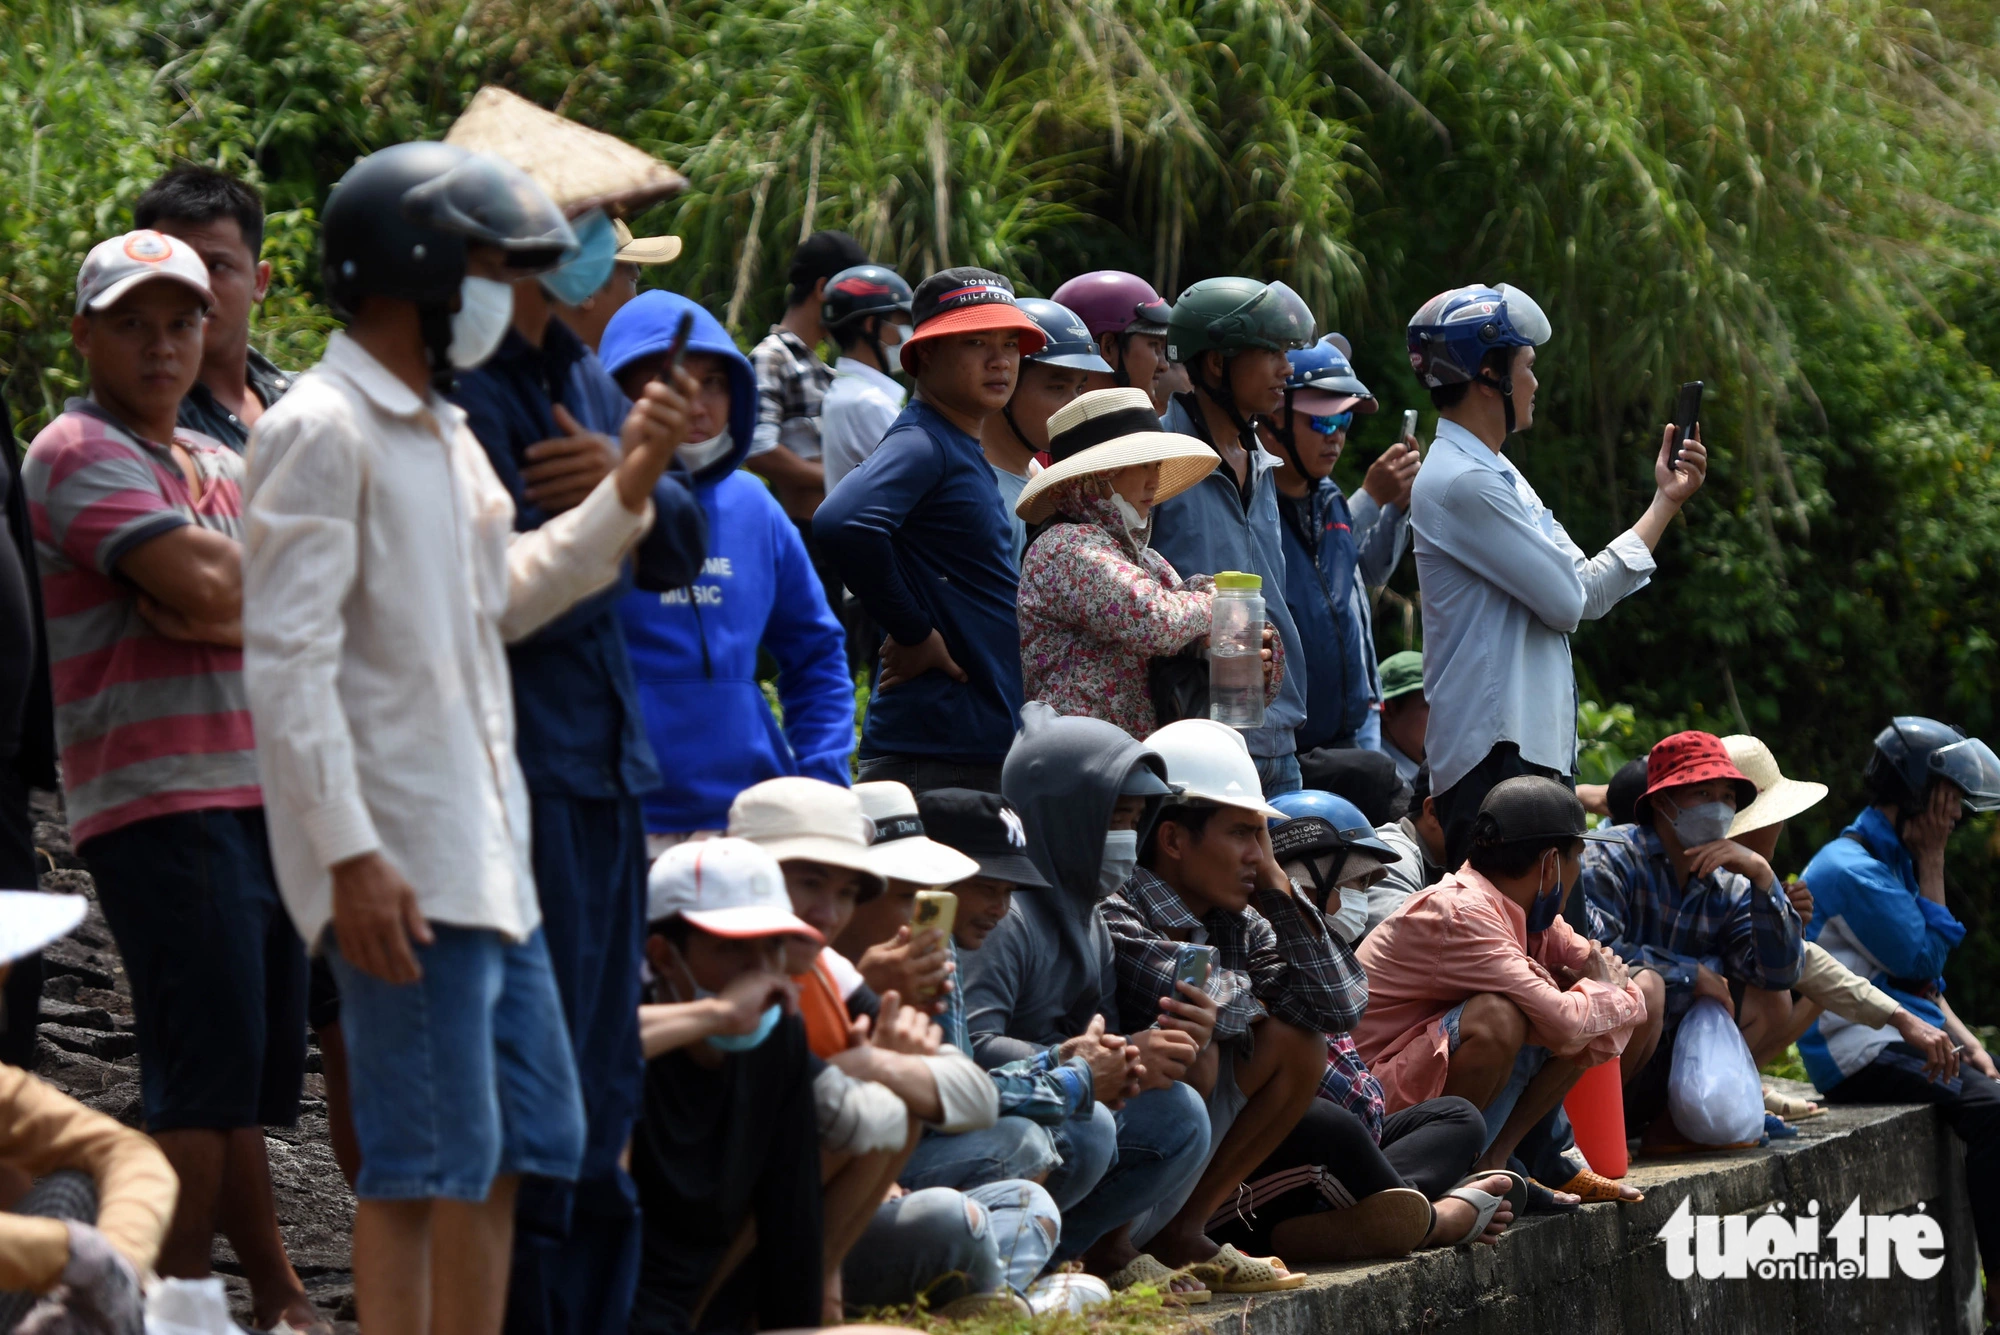 People watch angling at Tri An Hydropower Reservoir in Dong Nai Province, southern Vietnam, August 25, 2023. Photo: A Loc / Tuoi Tre